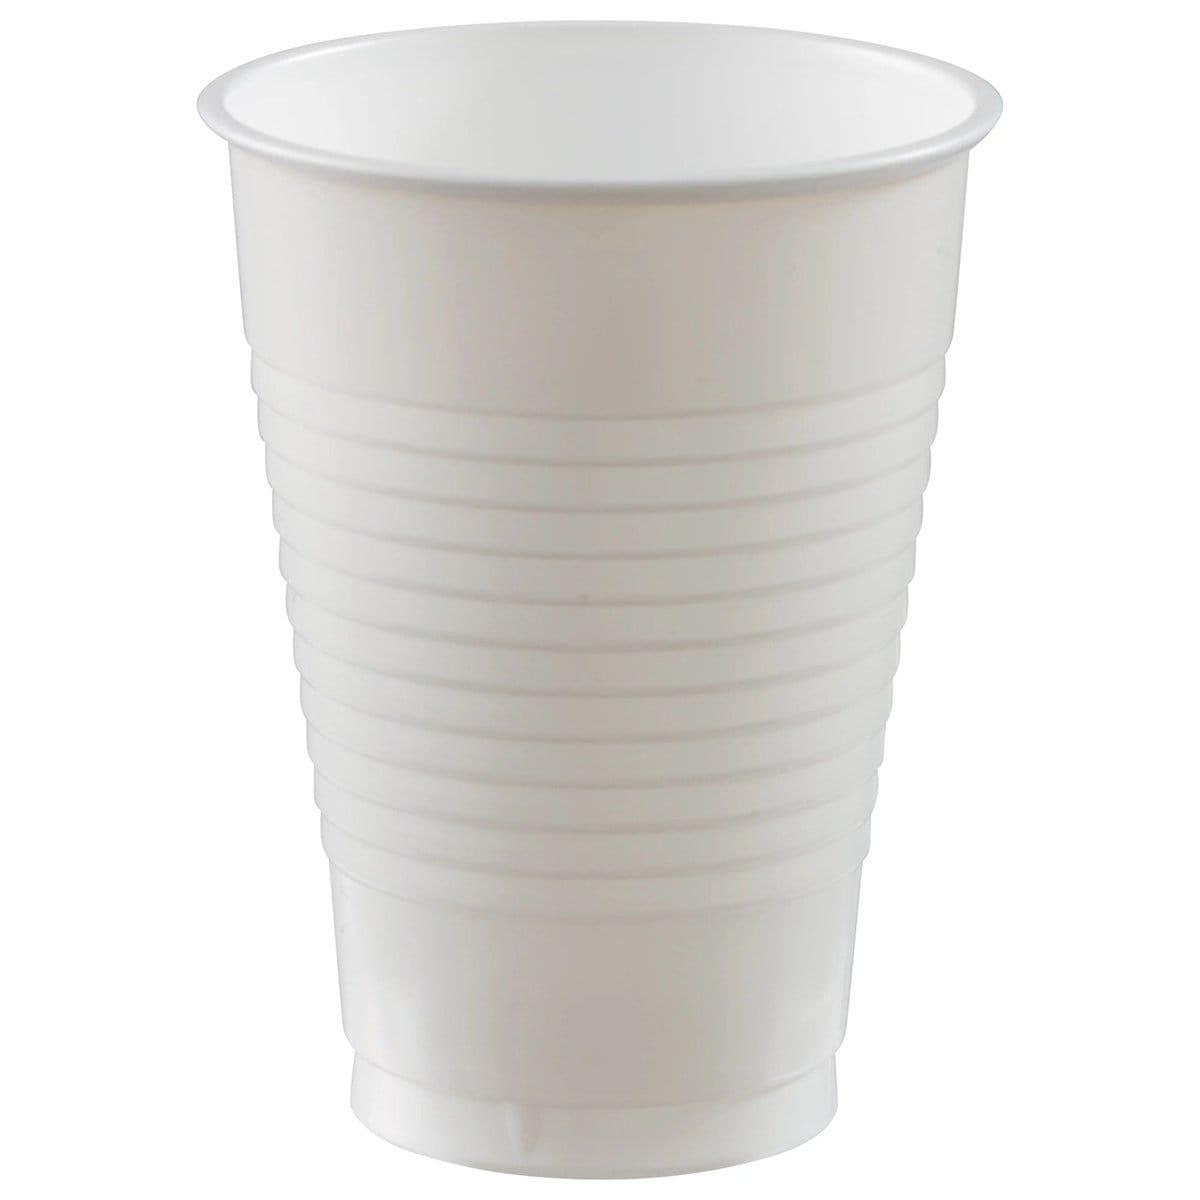 Buy plasticware Frosty White Plastic Cups, 12 oz., 50 Count sold at Party Expert